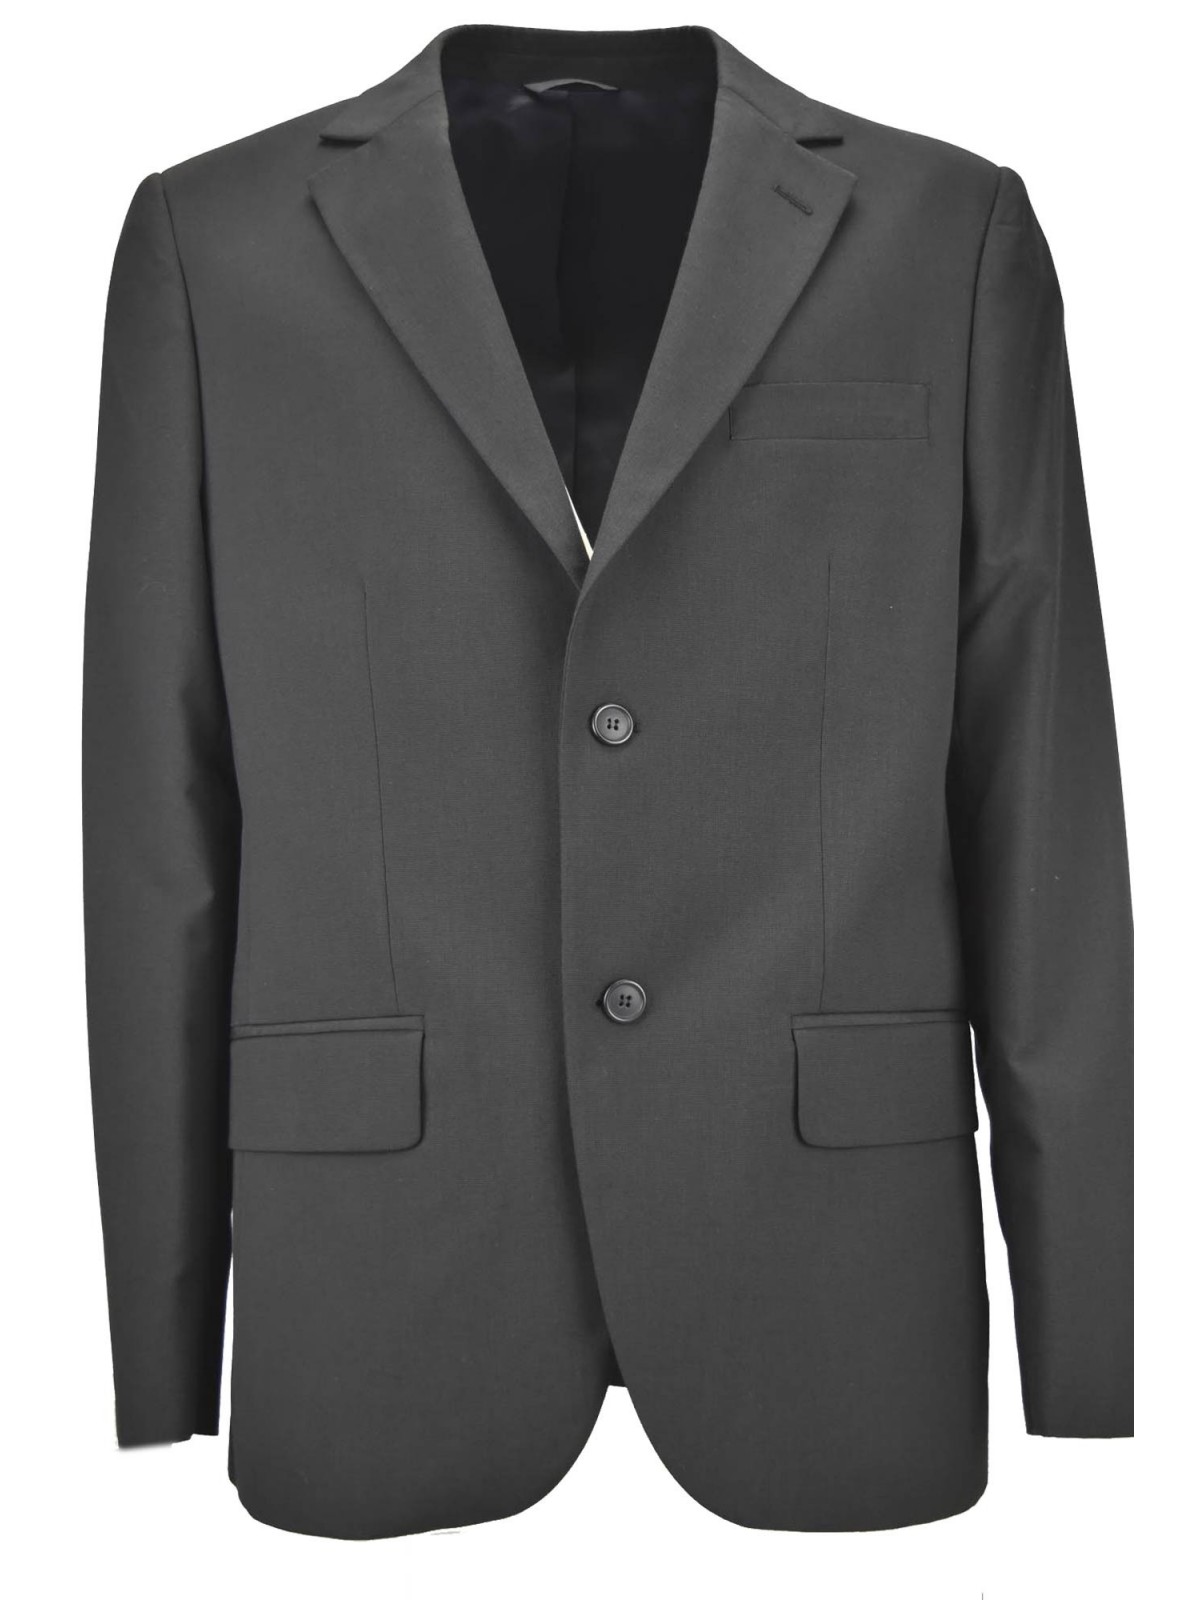 2Buttons Slim Man Suit 54 Dark Gray Solid Color 30218 4ST